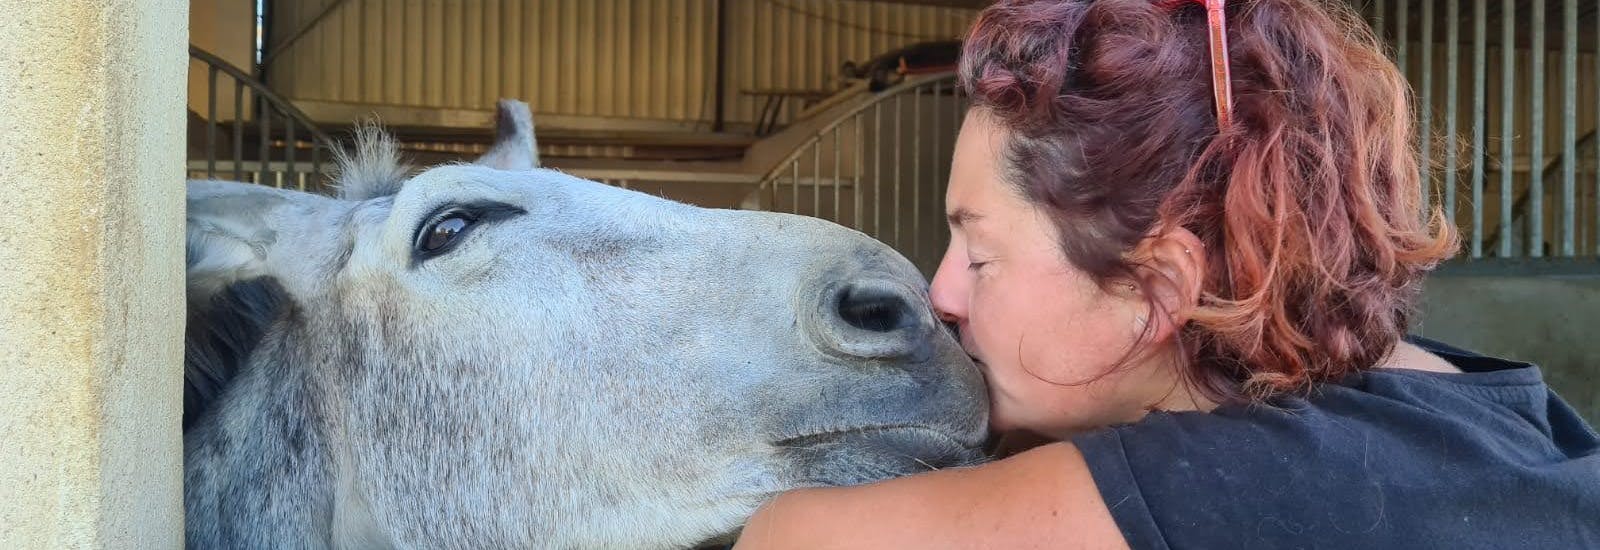 Woman hissing a horse on the nose